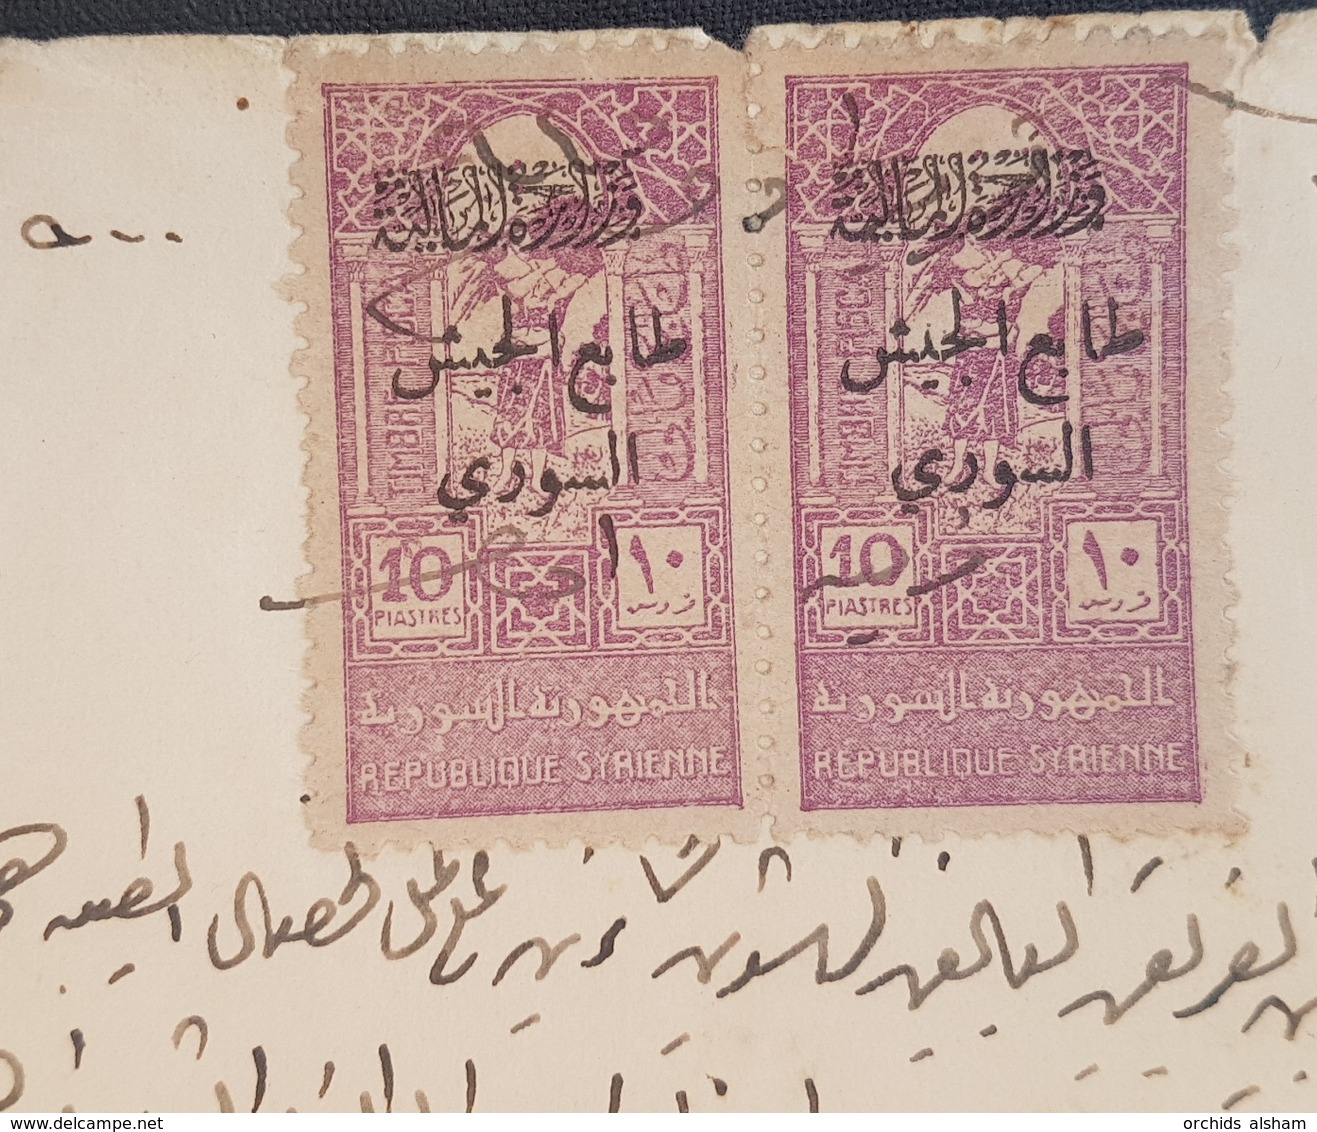 JA29 - Syria 1945 Document With Superb Selection Of Fiscal & Army Tax Revenue Stamps - Syria